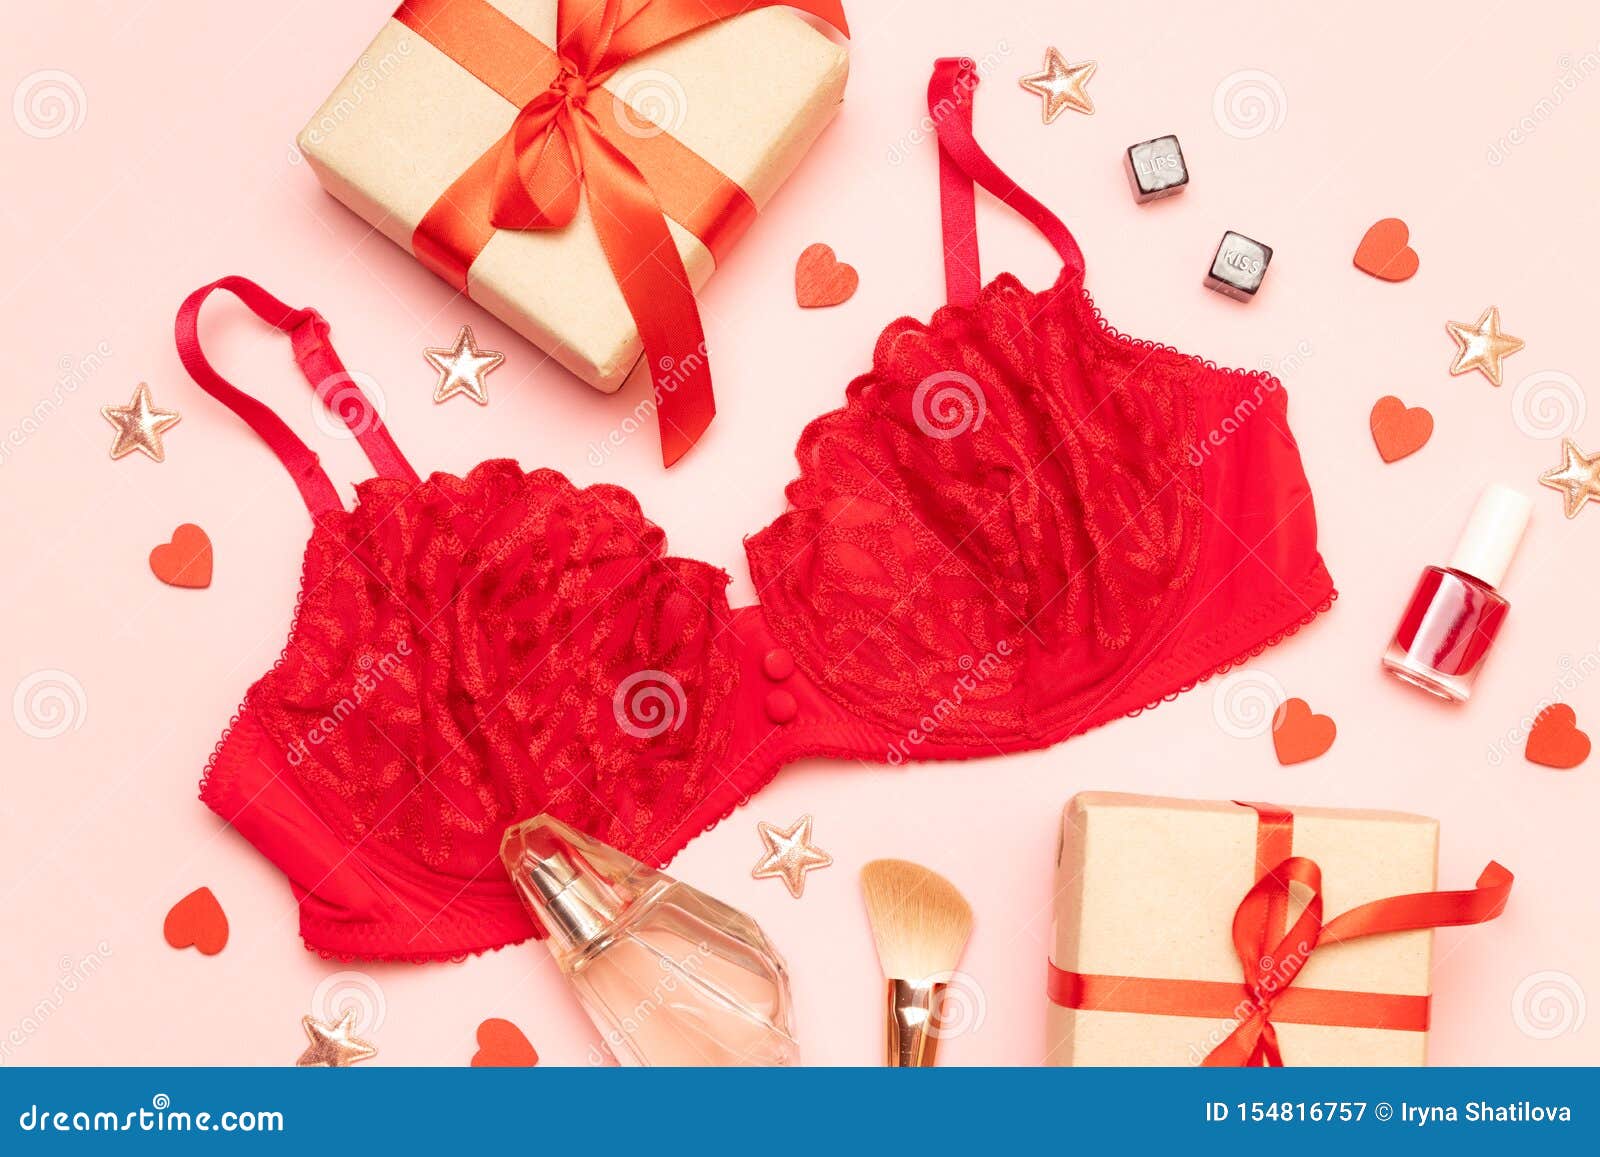 papir psykologisk sneen Flat Lay of Red Christmas Underwear with Gifts and Accessories Stock Image  - Image of erotic, december: 154816757